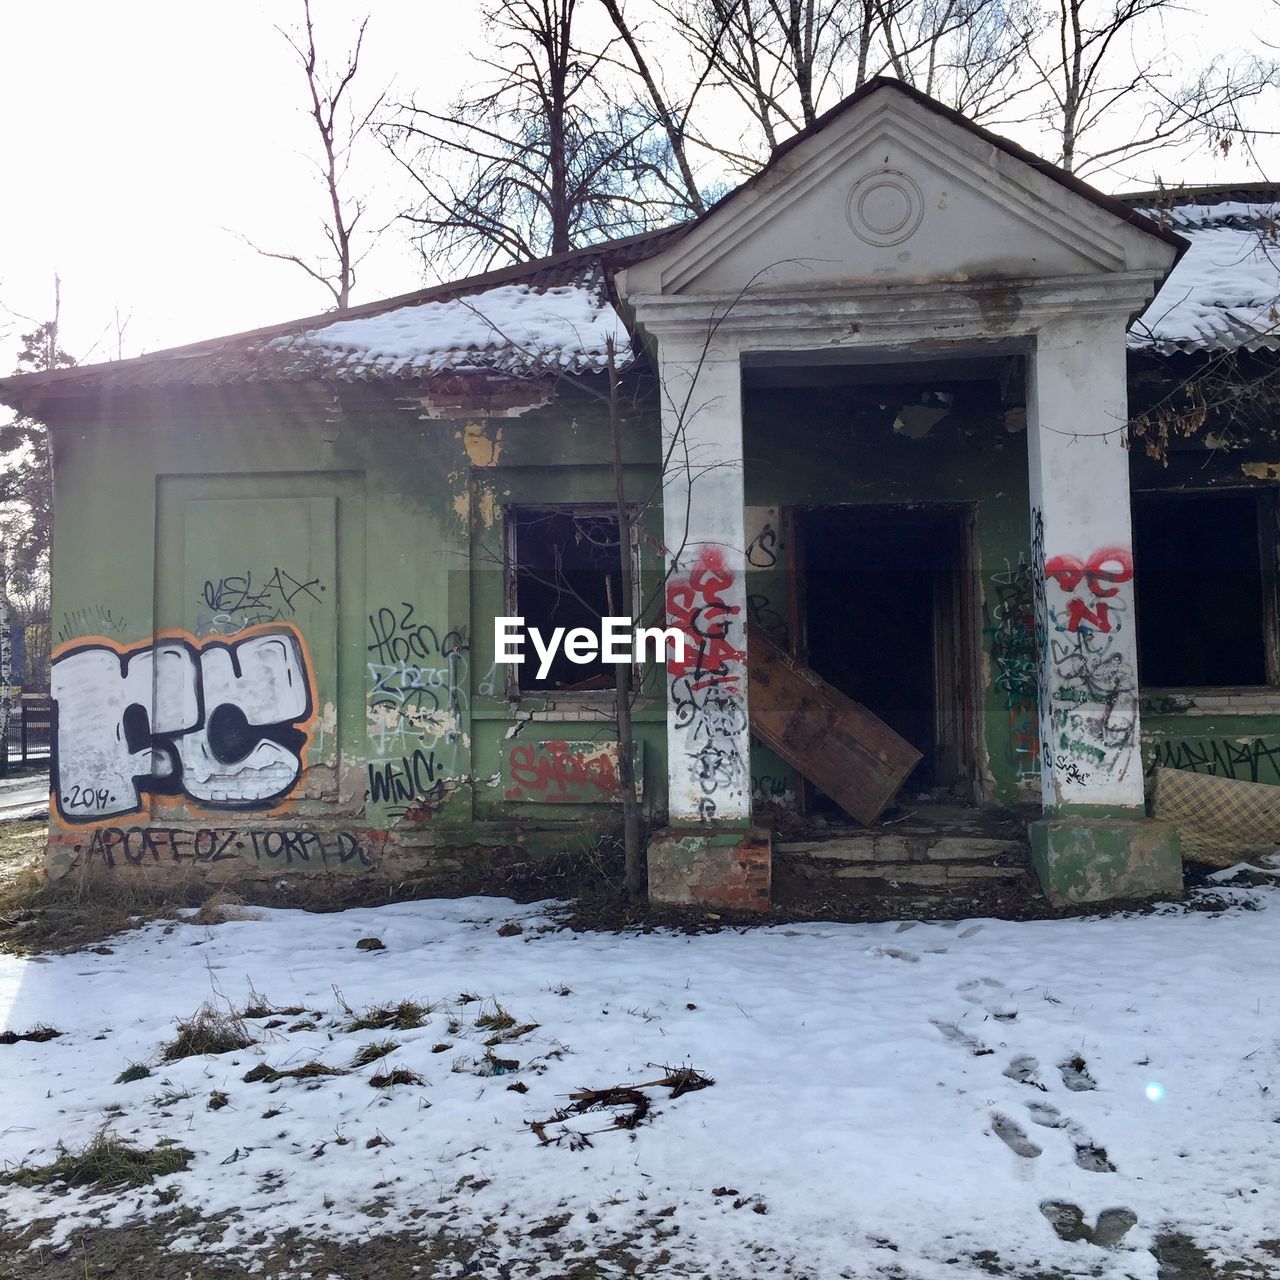 GRAFFITI ON HOUSE BY SNOW COVERED BUILDING